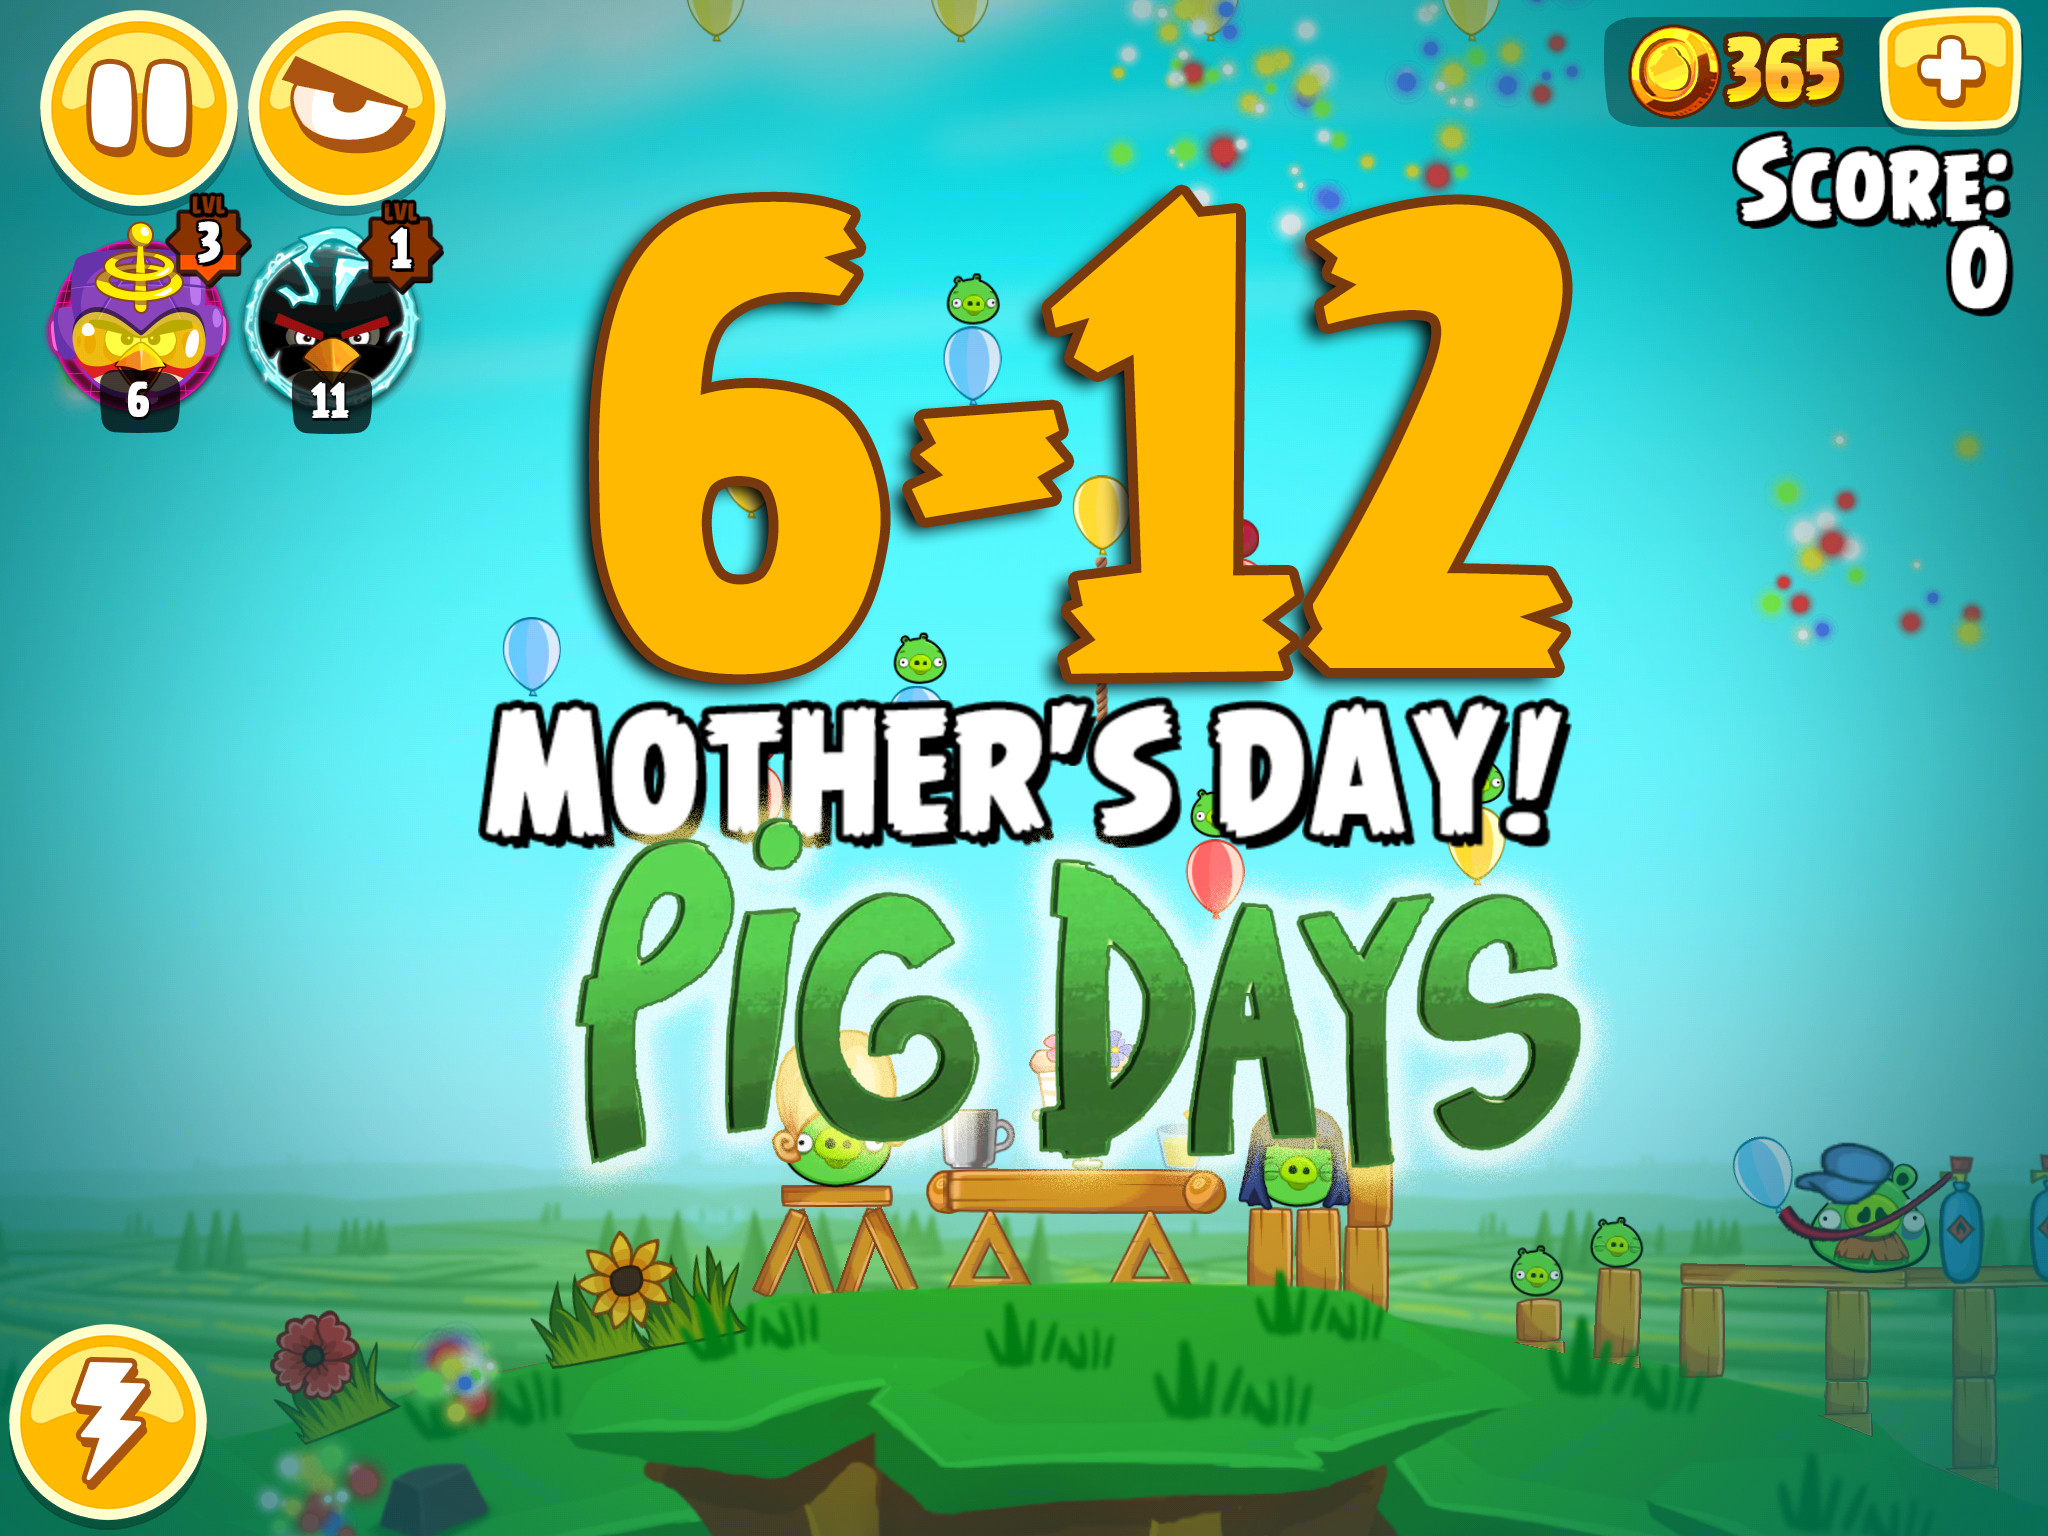 Angry Birds Seasons The Pig Days Level 6-12